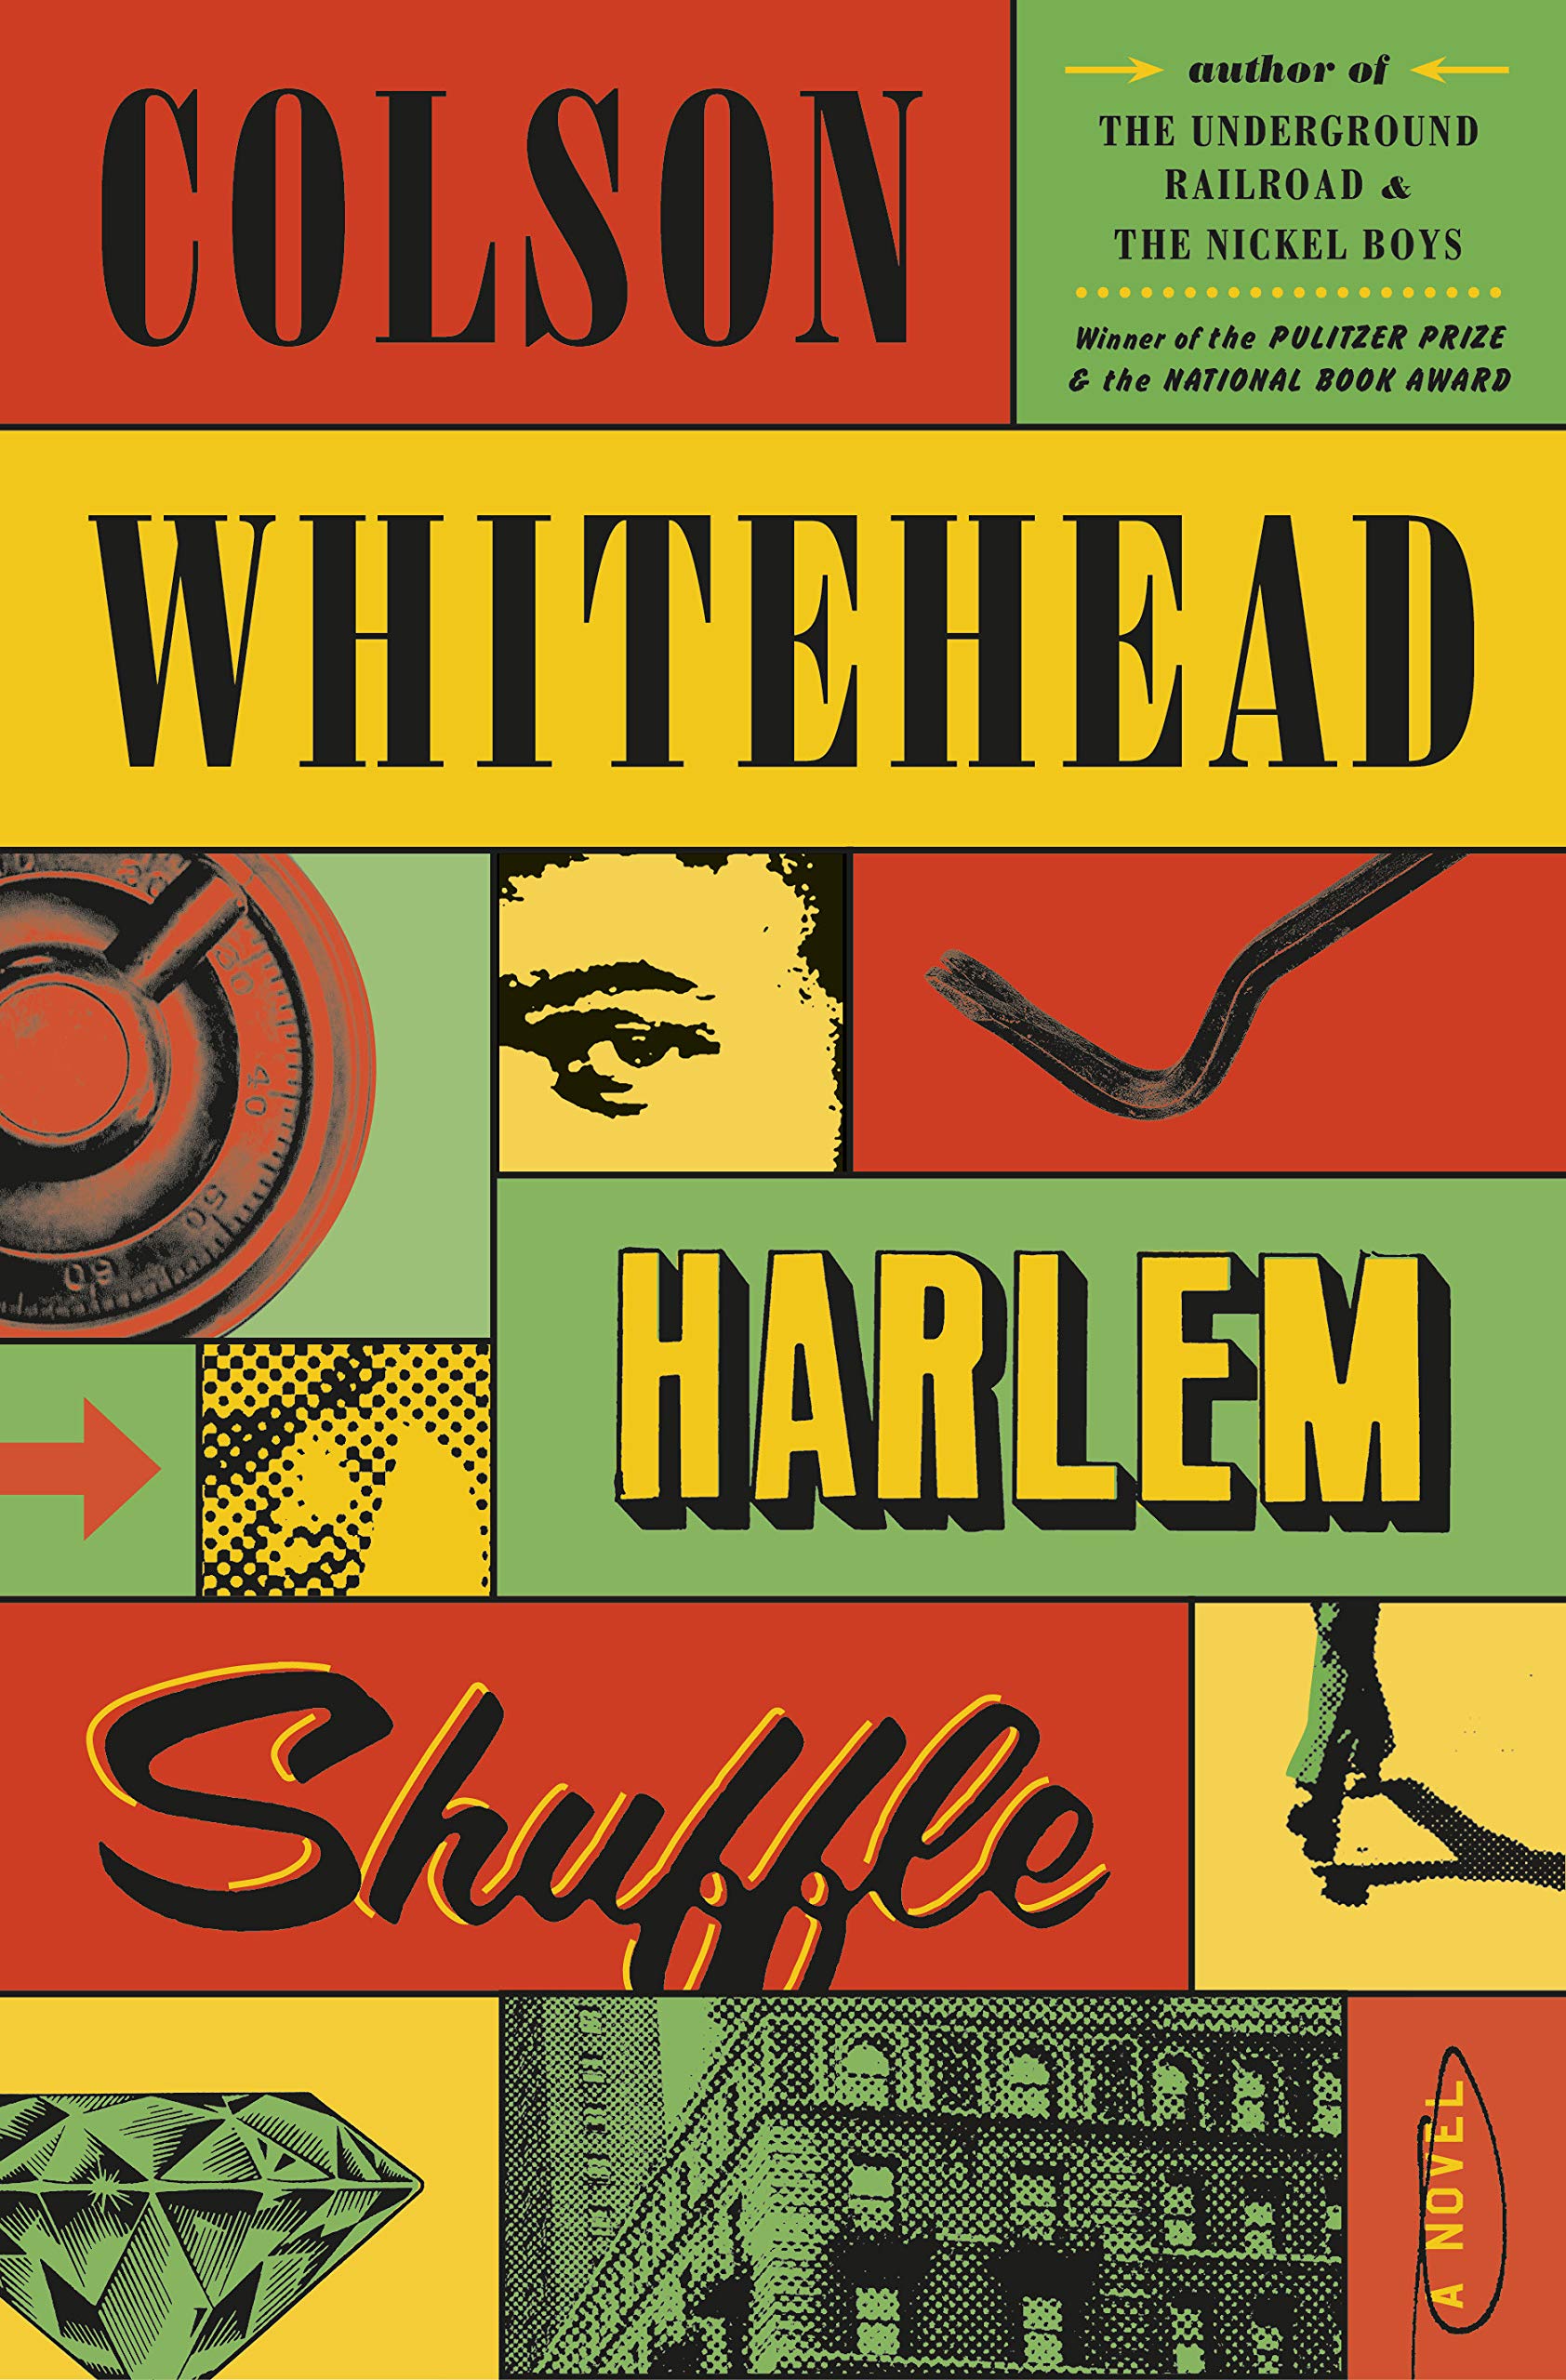 book cover of harlem shuffle by colson whitehead